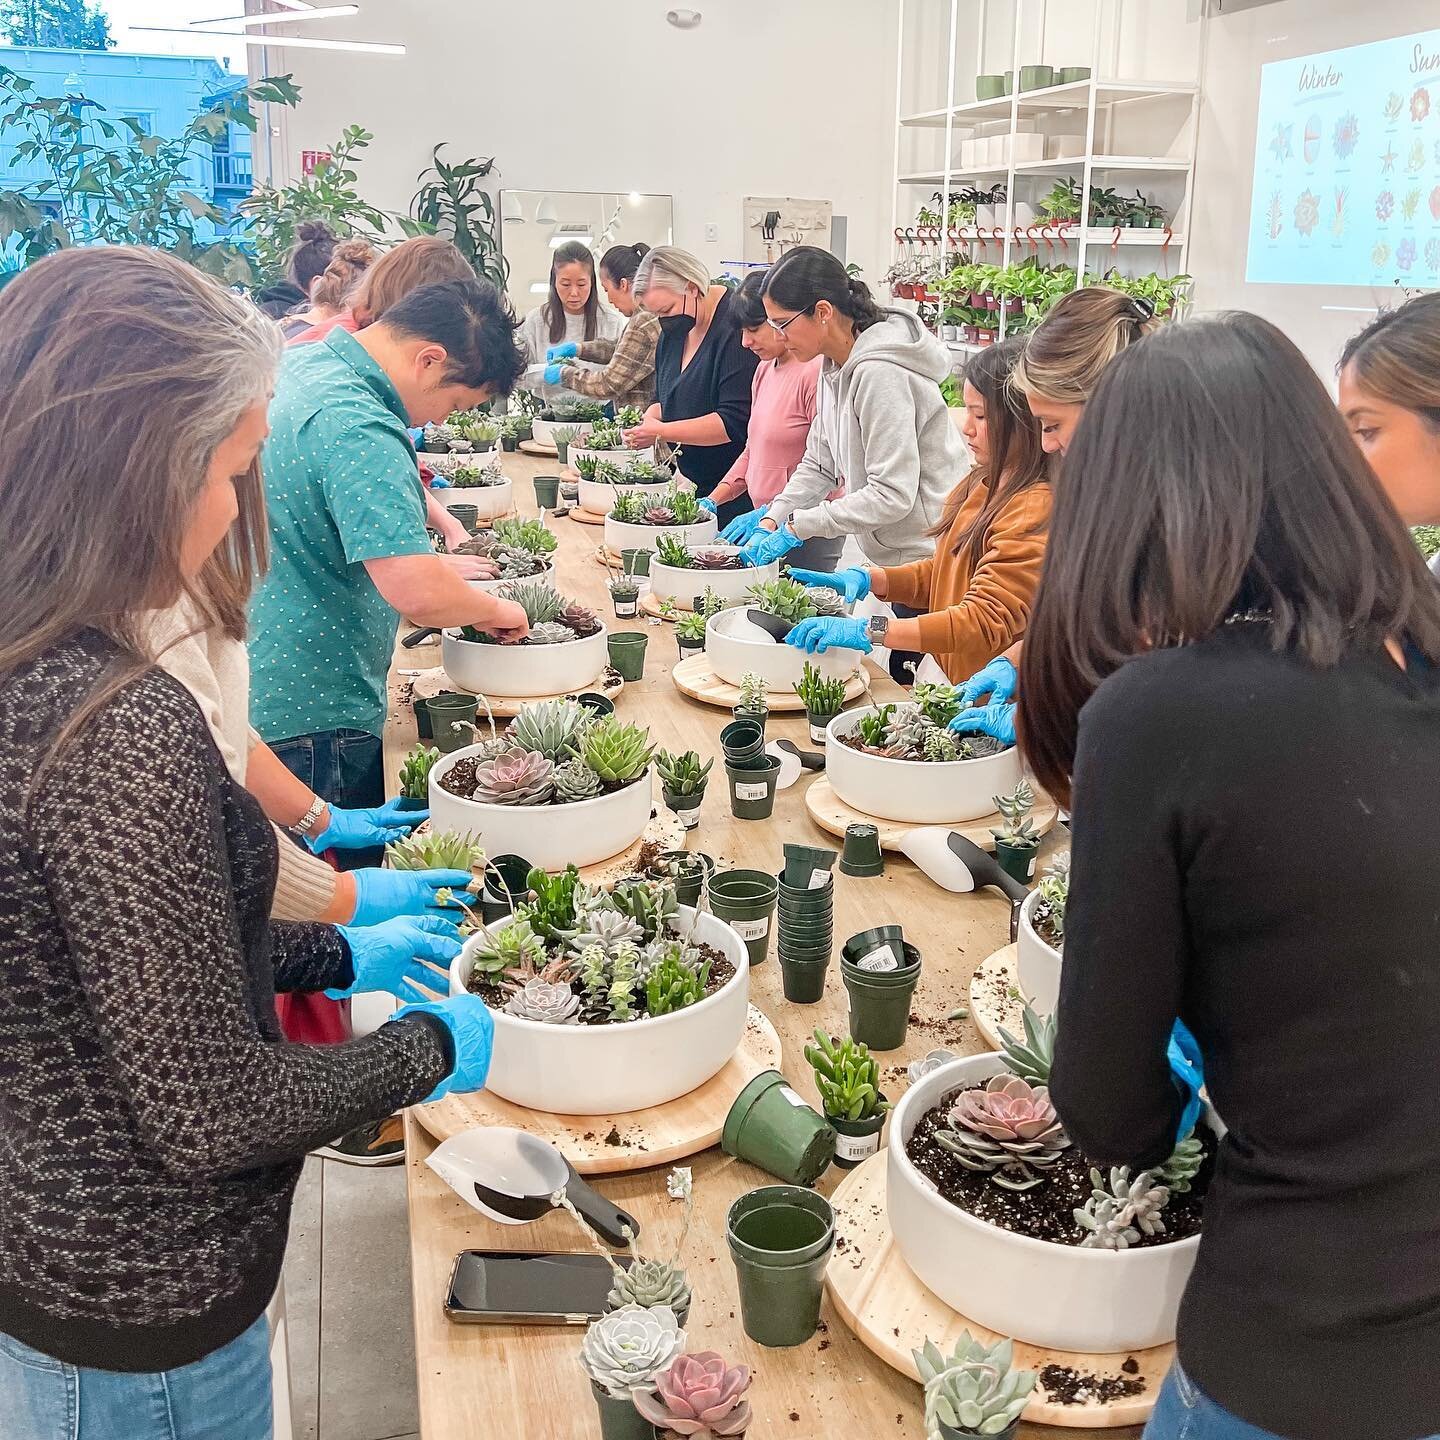 We kicked off our Winter workshops this evening with a customer favorite: Succulent Arranging! We love seeing everyone&rsquo;s unique arrangements come together in these matte white 12&rdquo; succulent bowls 🤩

Join us for our heart shaped wreath ma